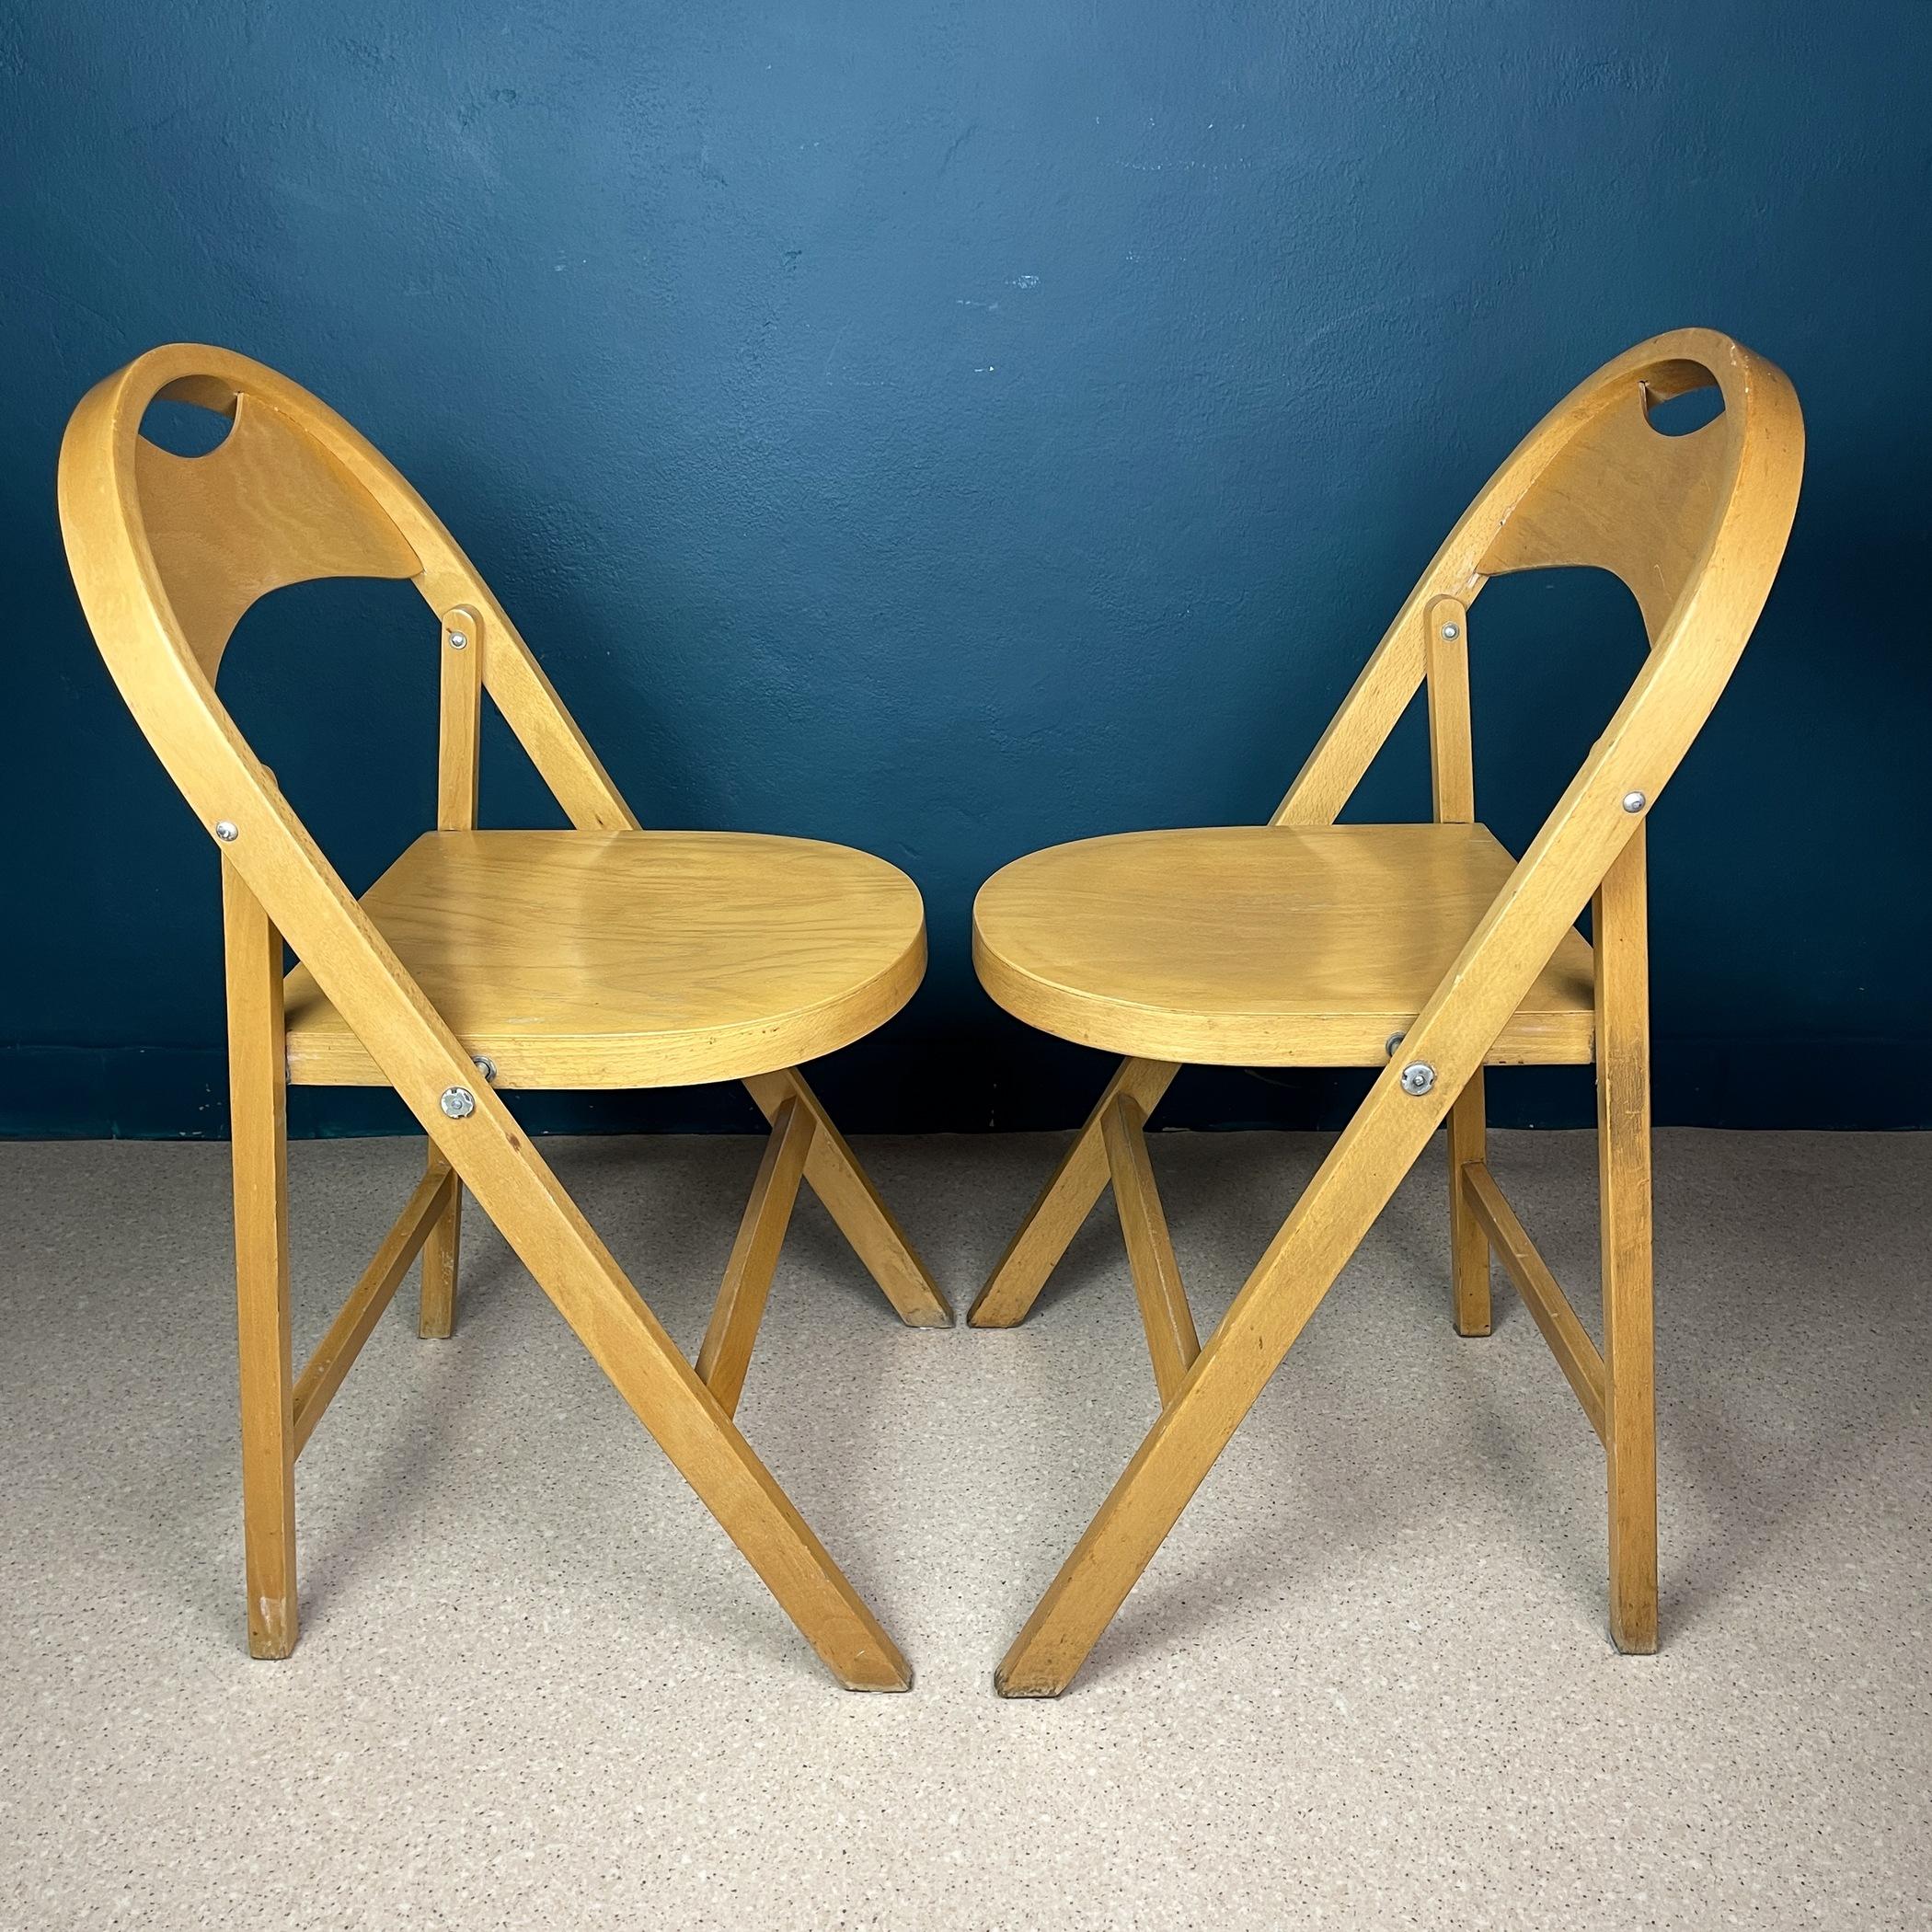 20th Century Chair Tric by Achille & Pier Giacomo Castiglioni for BBB Emmebonacina Italy 1970